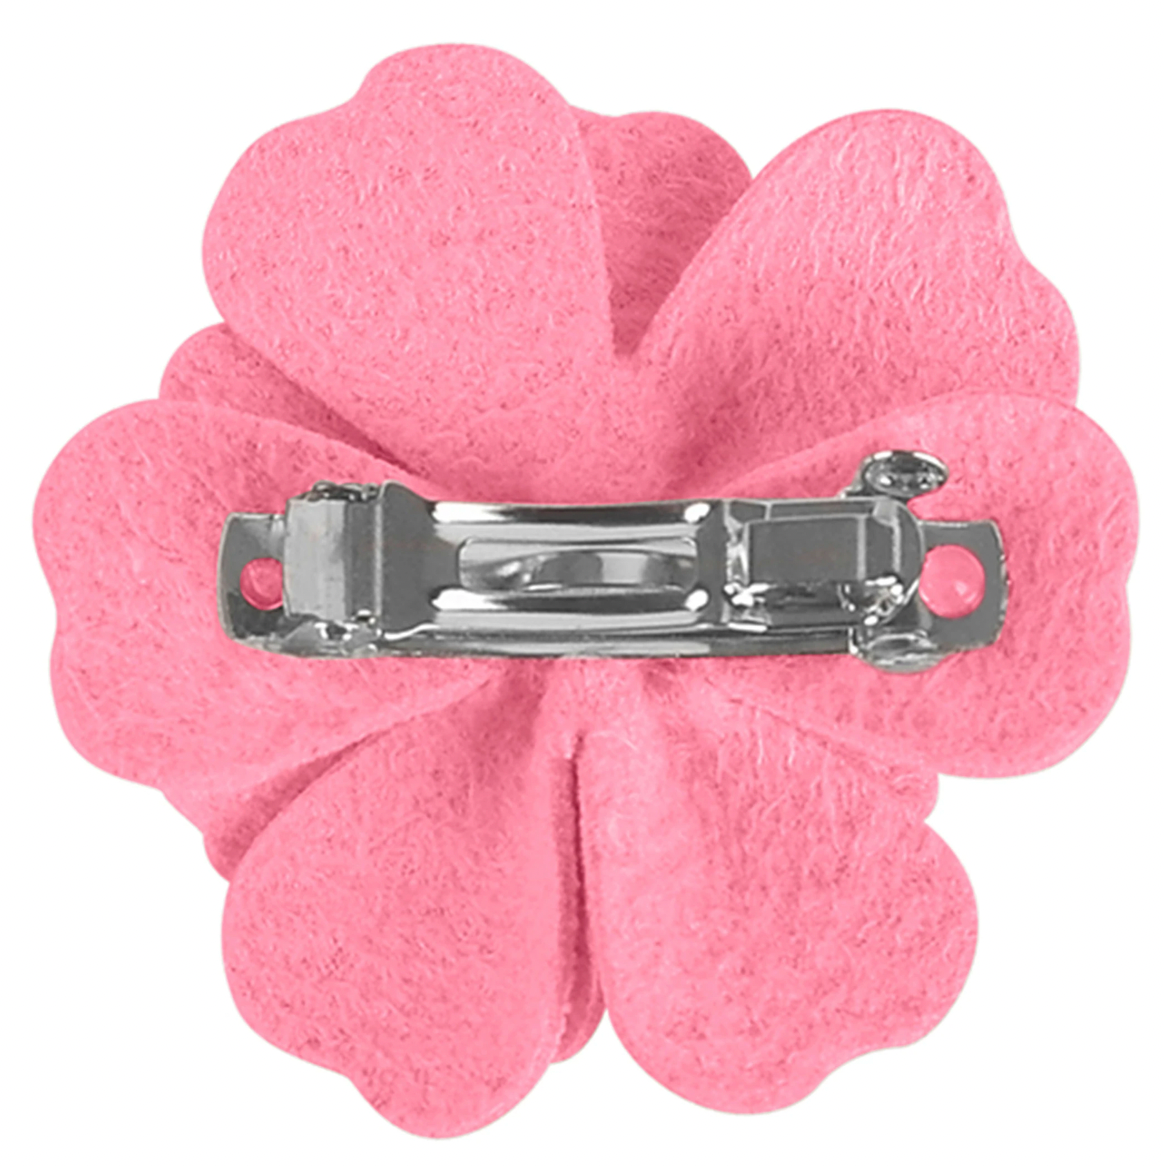 Tinkie's Garden Flower Hair-Bow For Pets